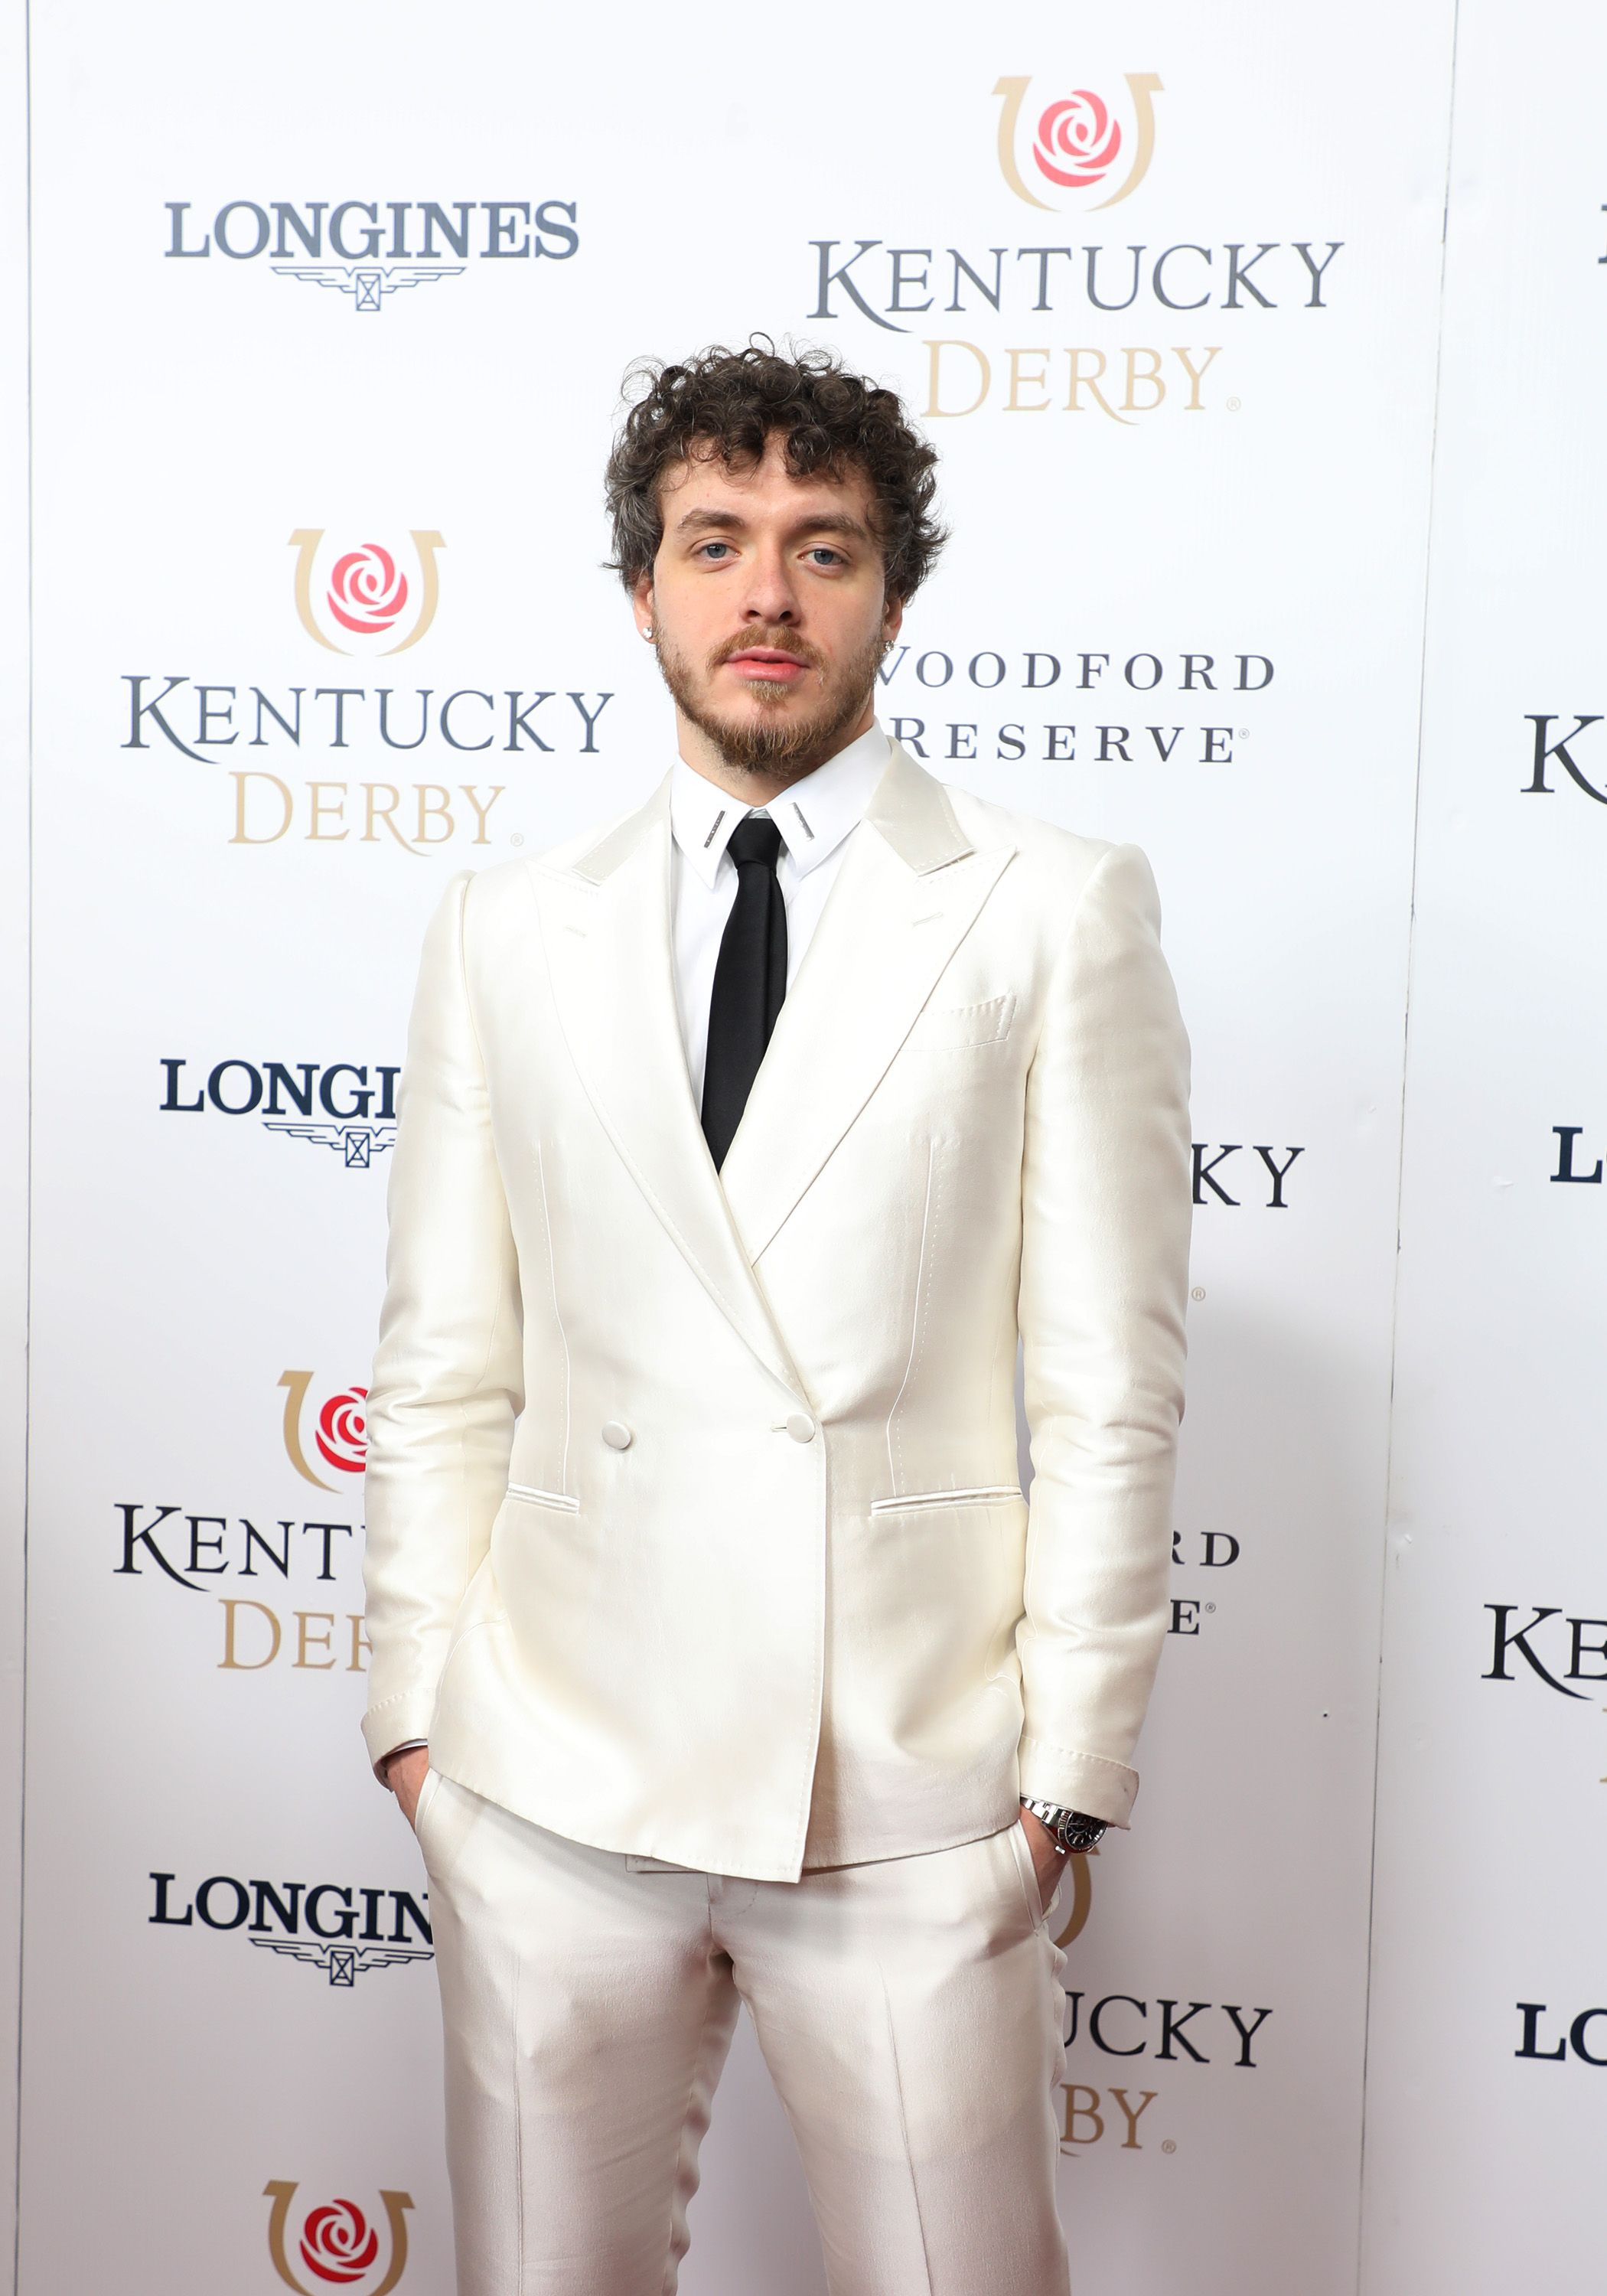 Jack harlow in white suit